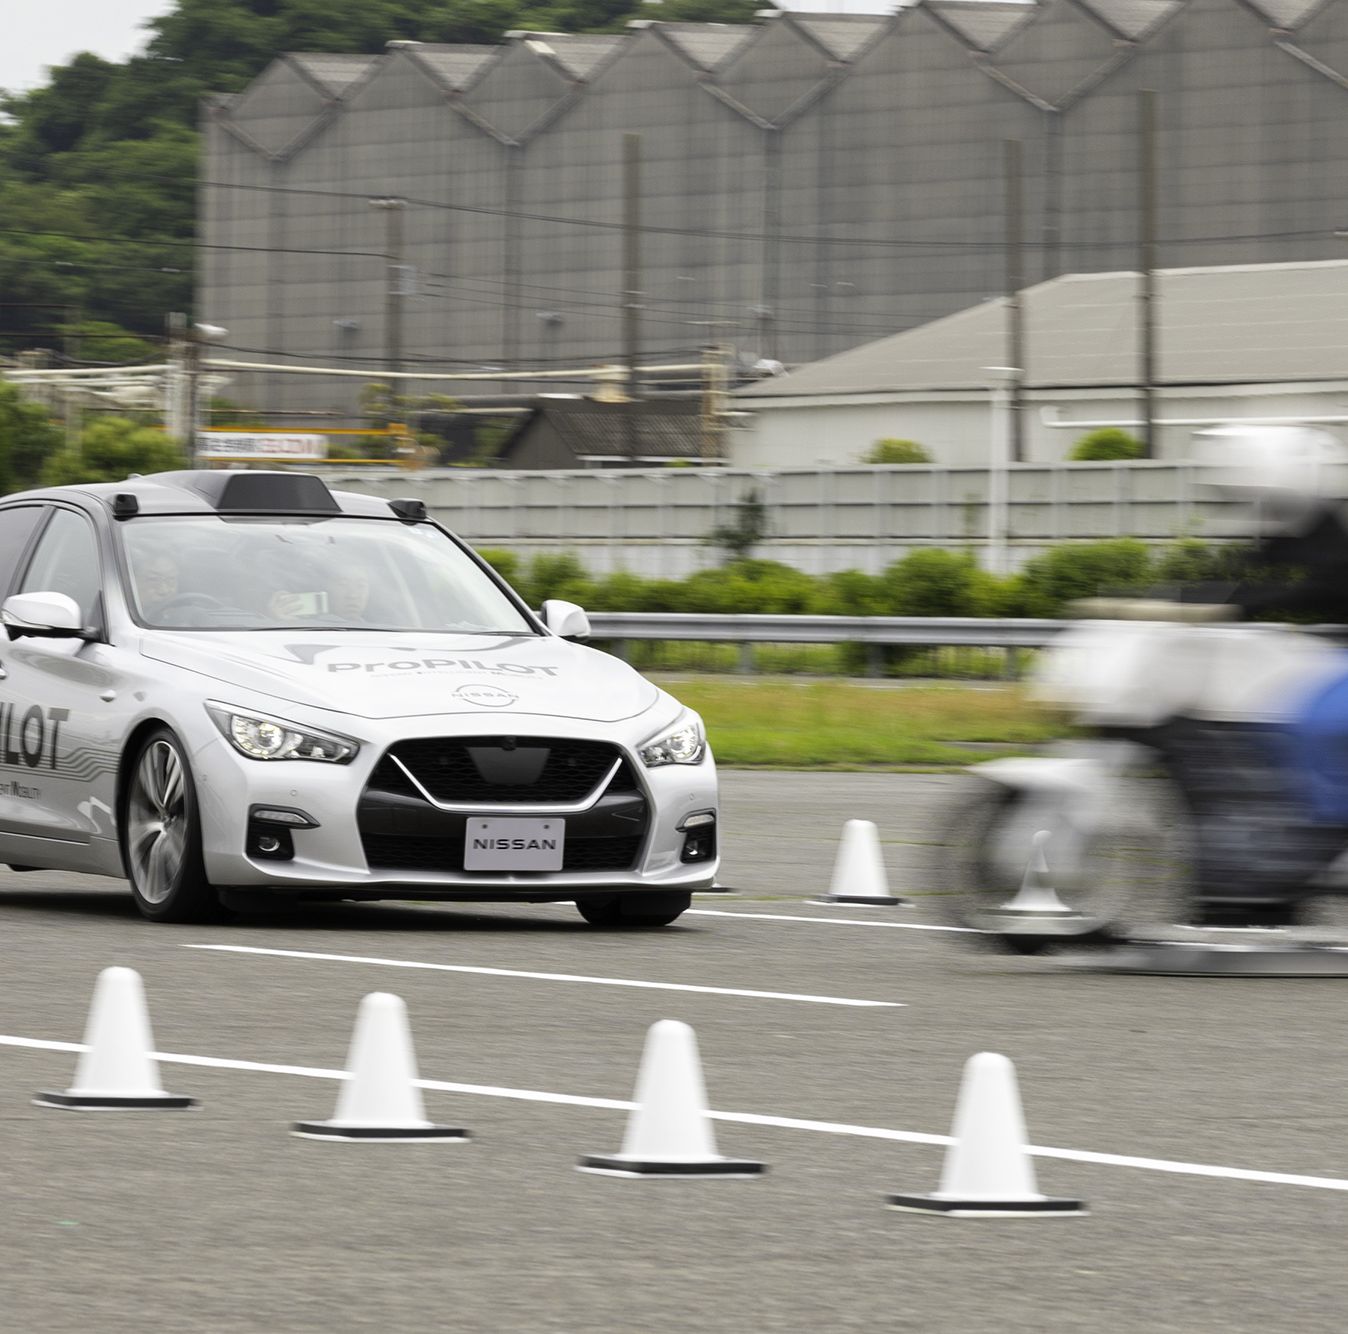 Nissan Is Using Lidar to Test a New Crash-Avoidance System